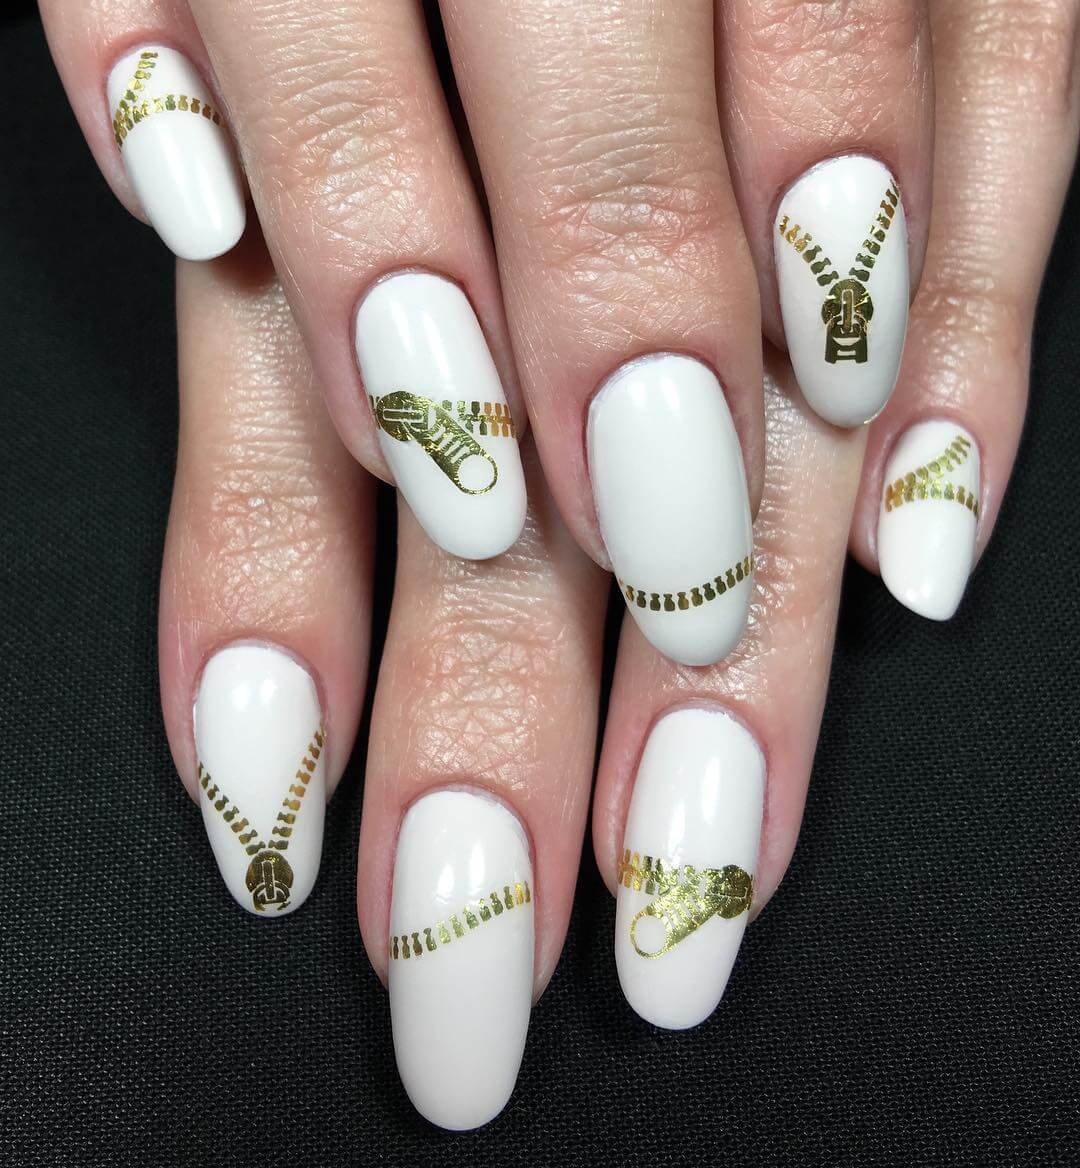 Jeans and Zipper Nail Art White And Zippers